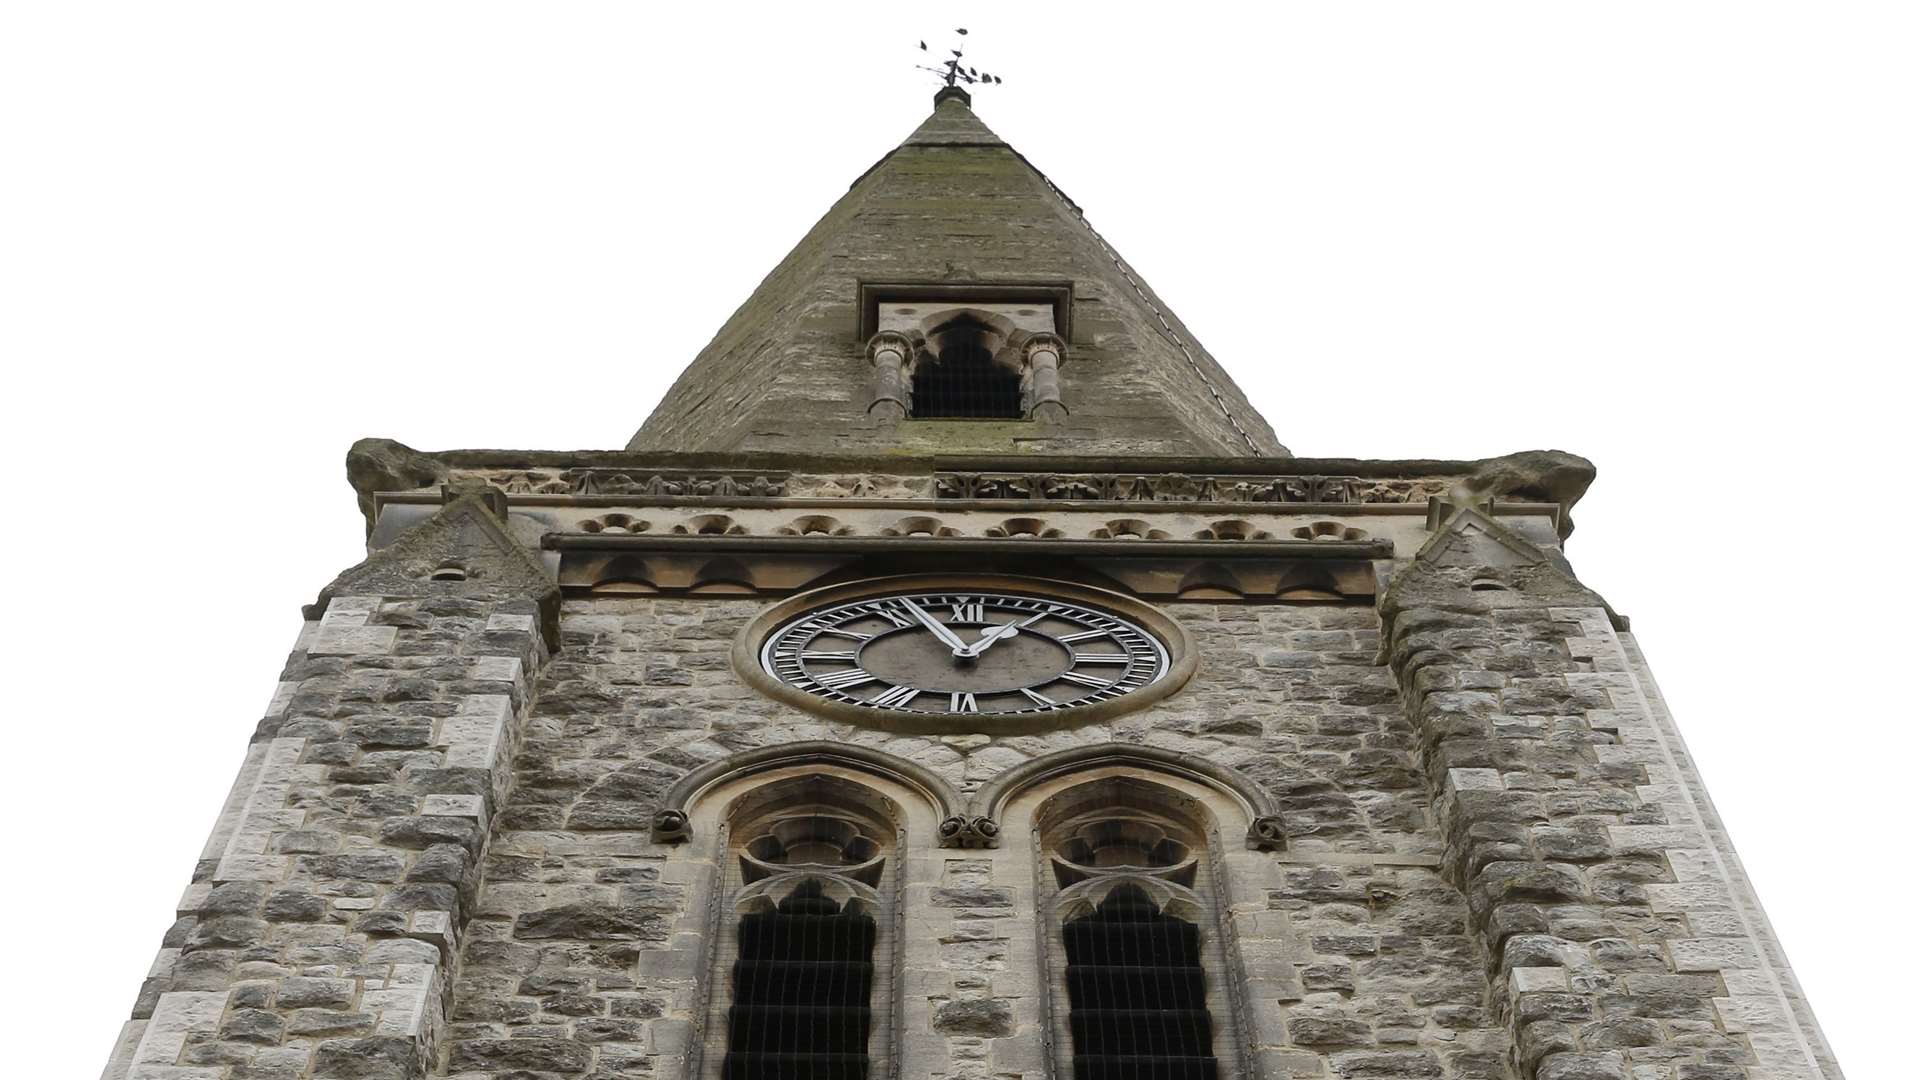 Which church is this in Maidstone?